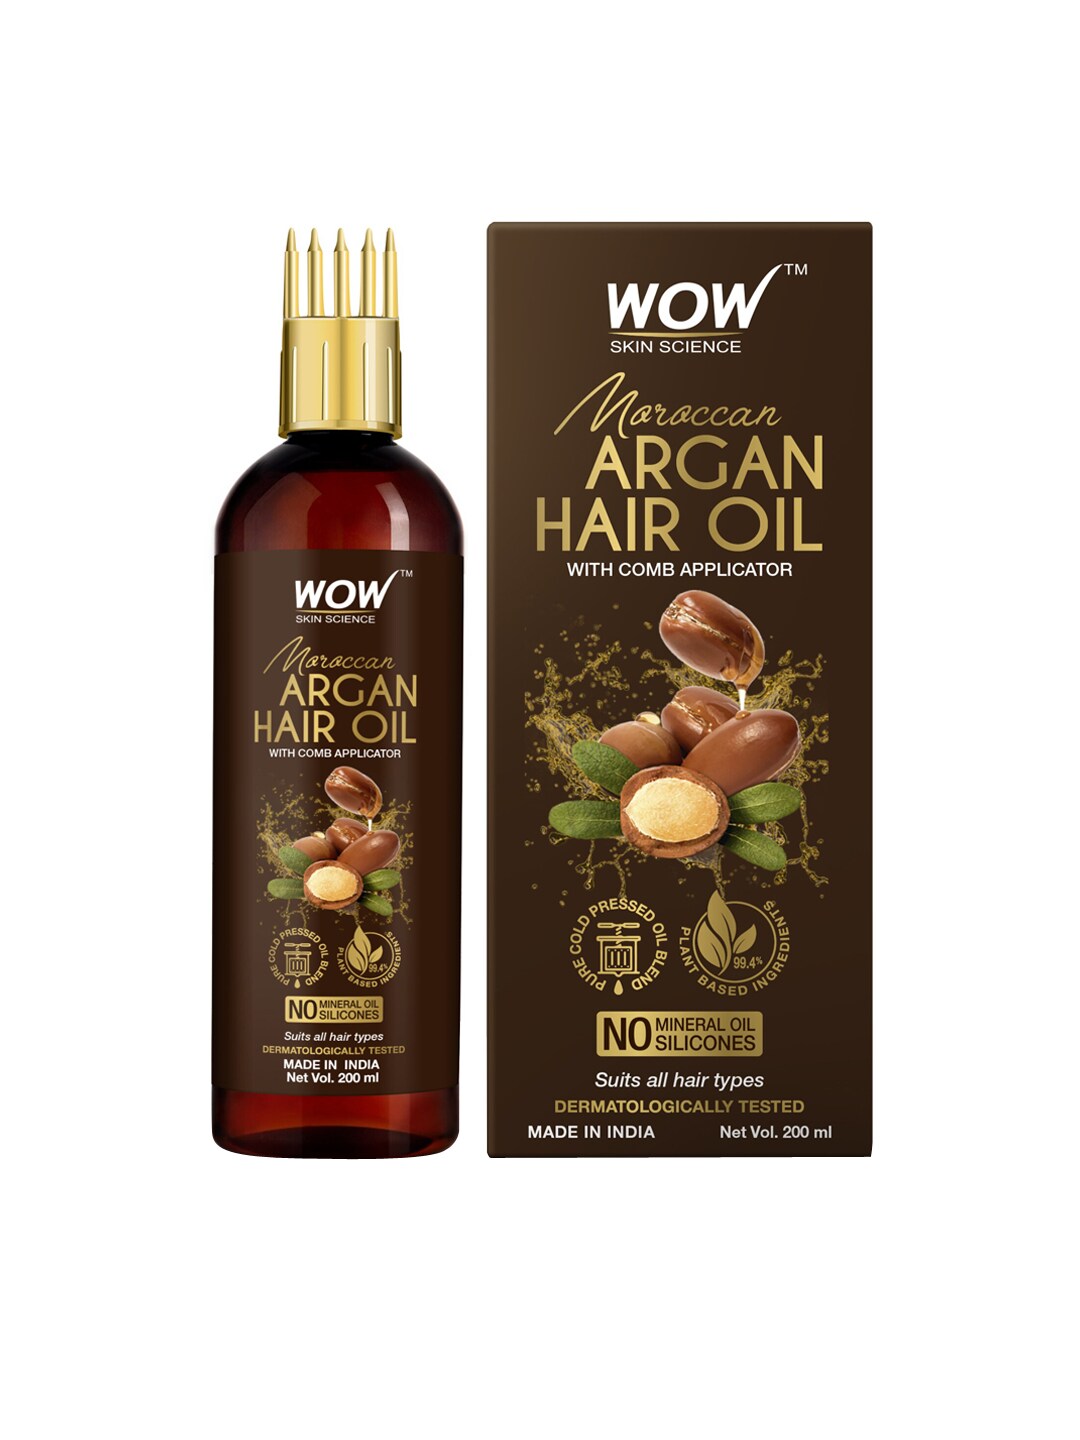 WOW SKIN SCIENCE Moroccan Argan Hair Oil with Comb Applicator 200 ml Price in India